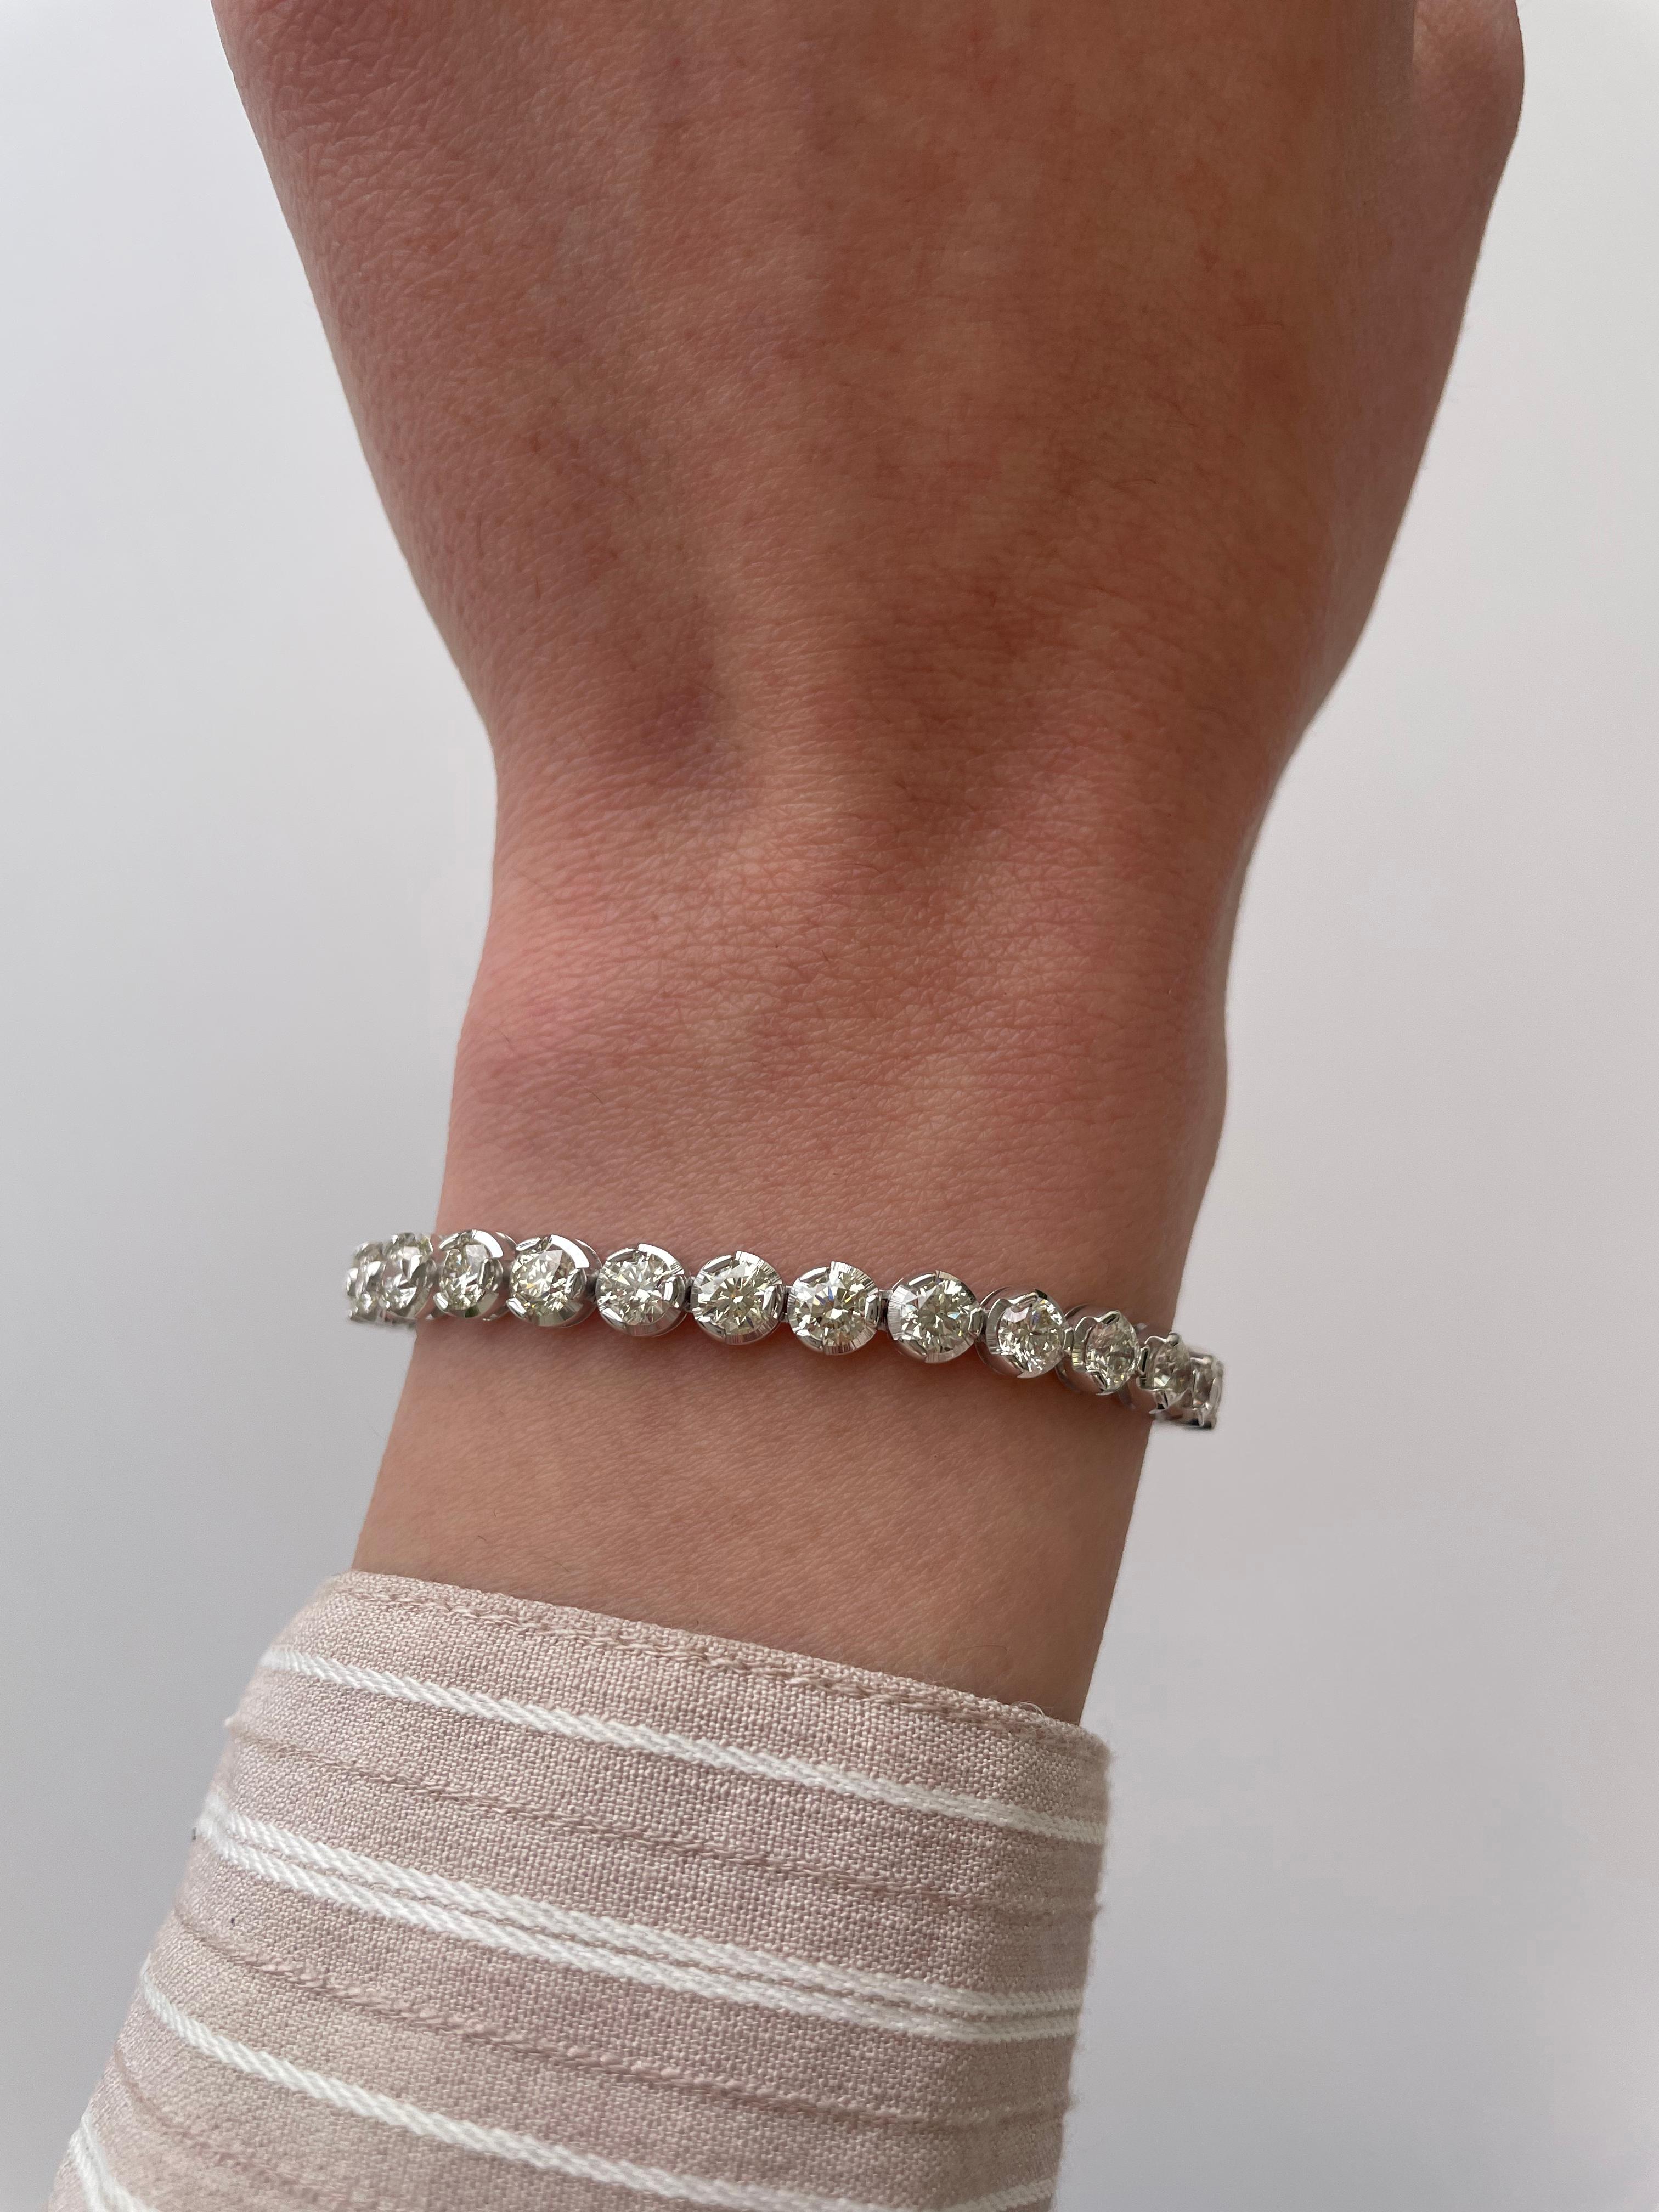 Exquisite and timeless illusion set diamonds tennis bracelet, by Alexander Beverly Hills.
32 round brilliant diamonds, 10.04 carats total. Approximately G/H color and VS clarity. Four prong set in 18k white gold, 15.57 grams, 7 inches. 
Accommodated